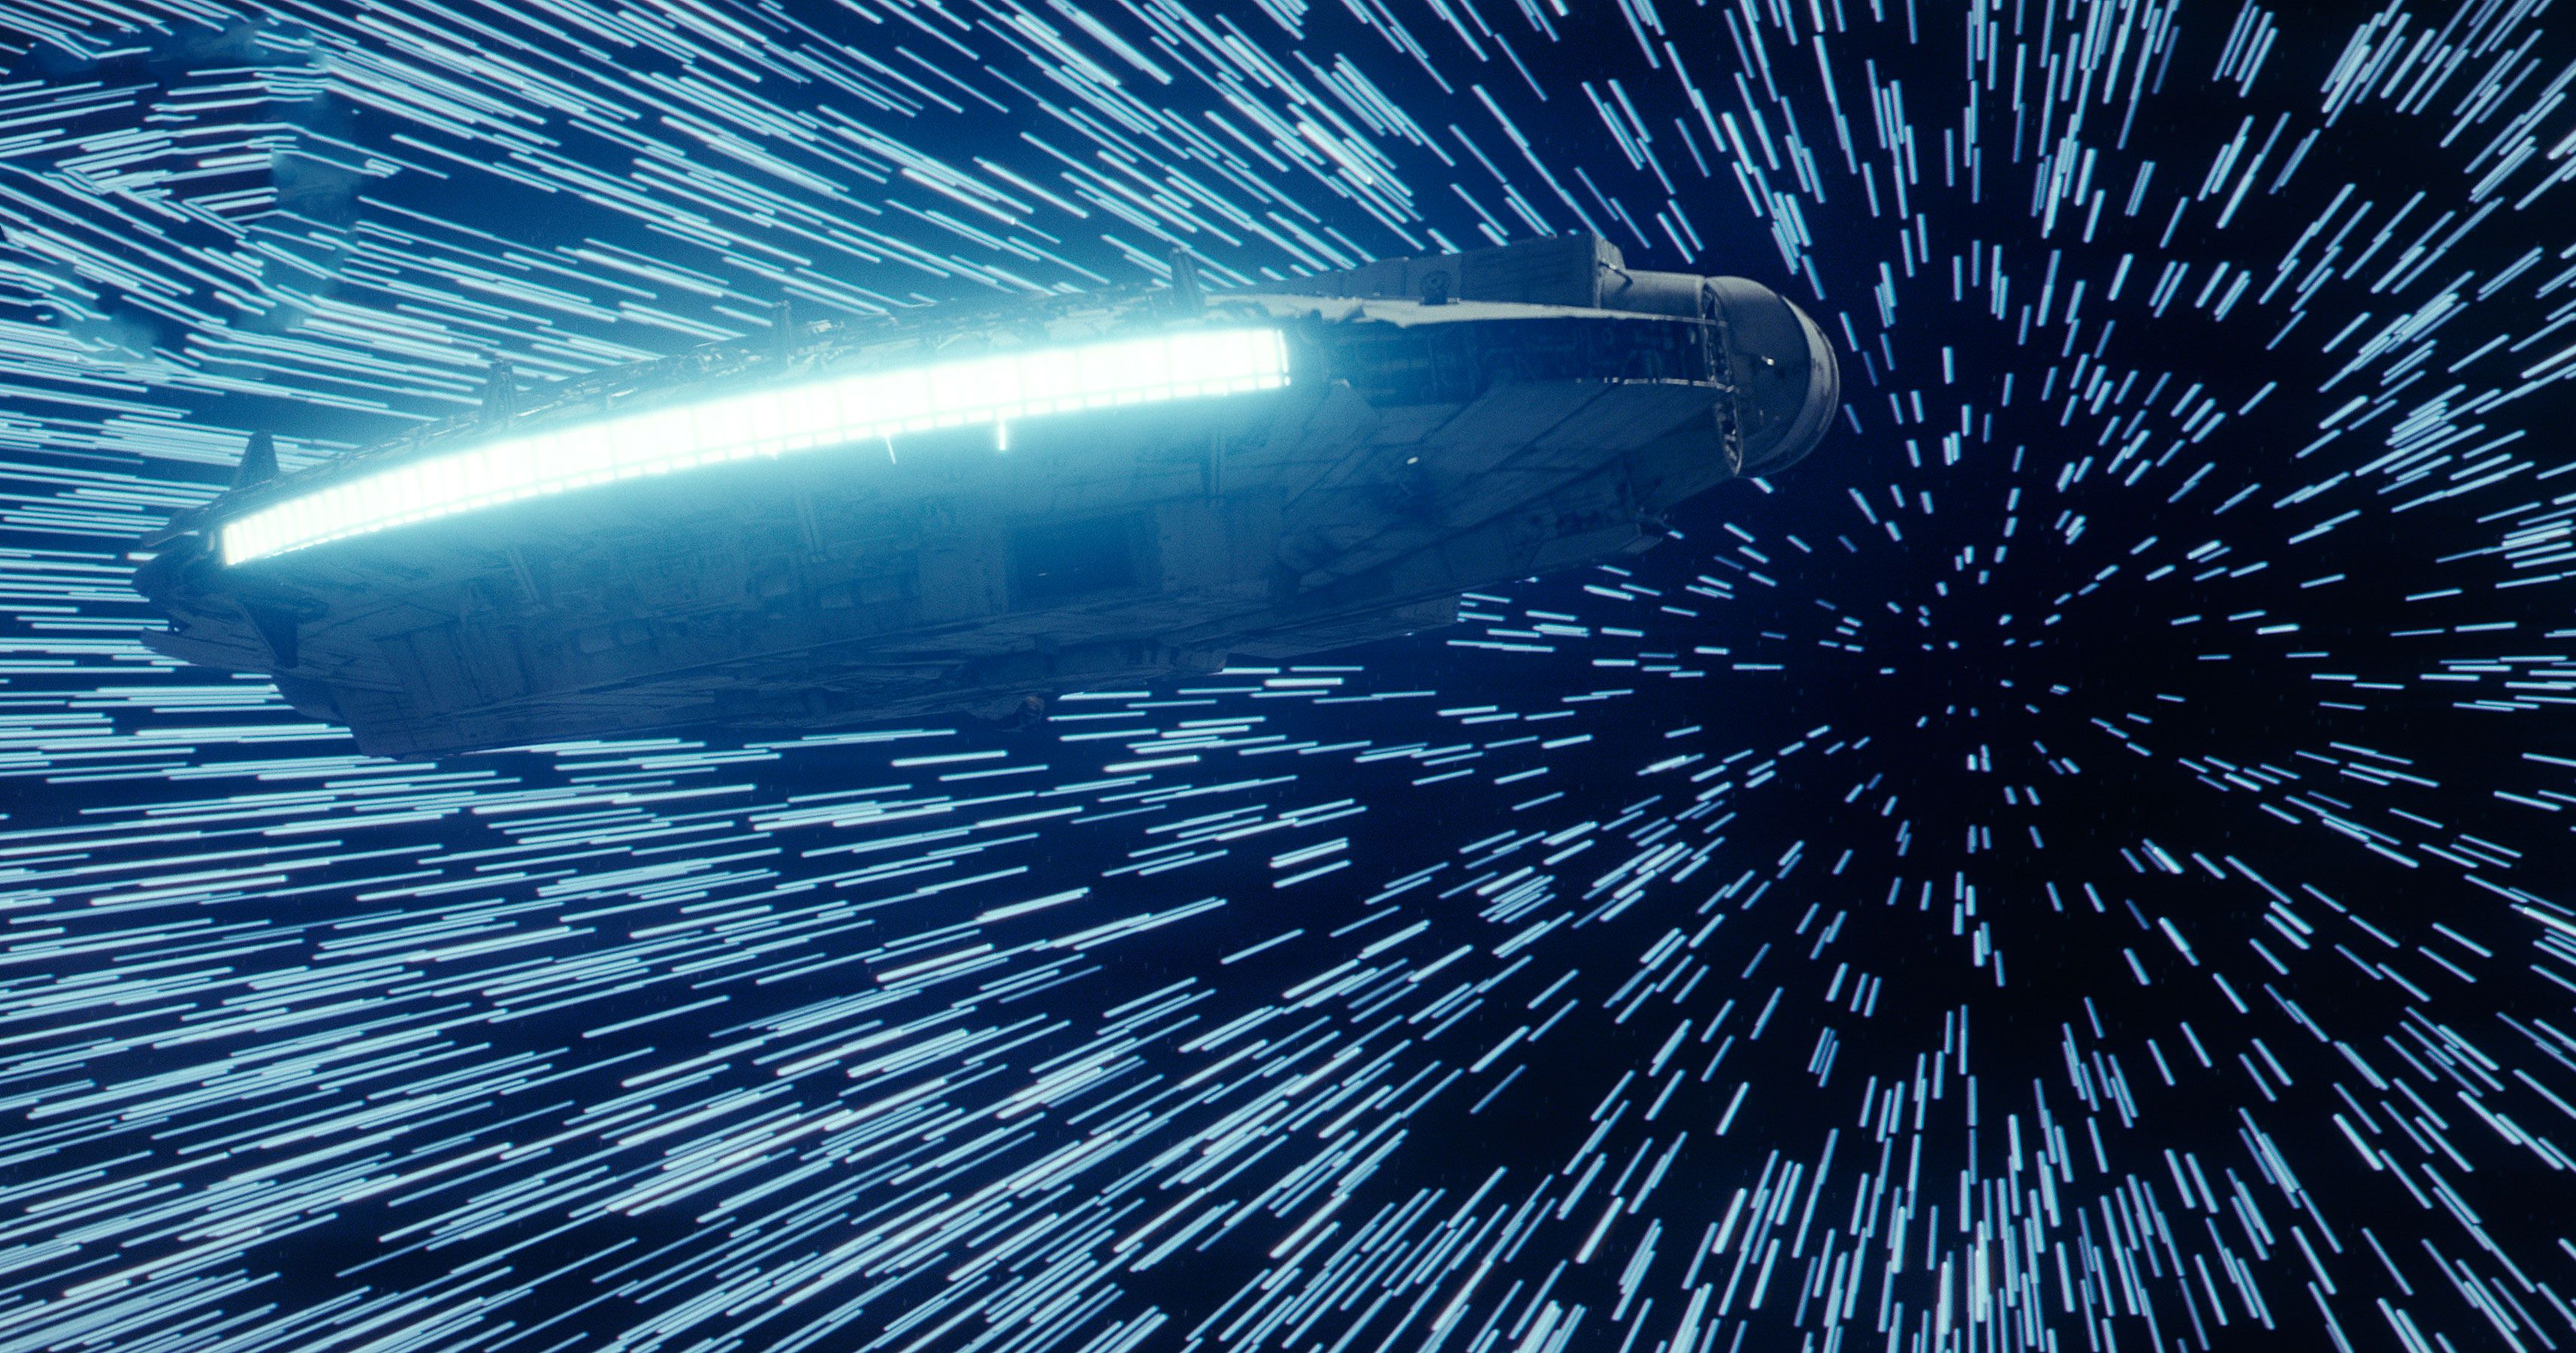 Star Wars The Last Jedi Millennium Falcon Hitting Lightspeed, HD Movies, 4k Wallpaper, Image, Background, Photo and Picture